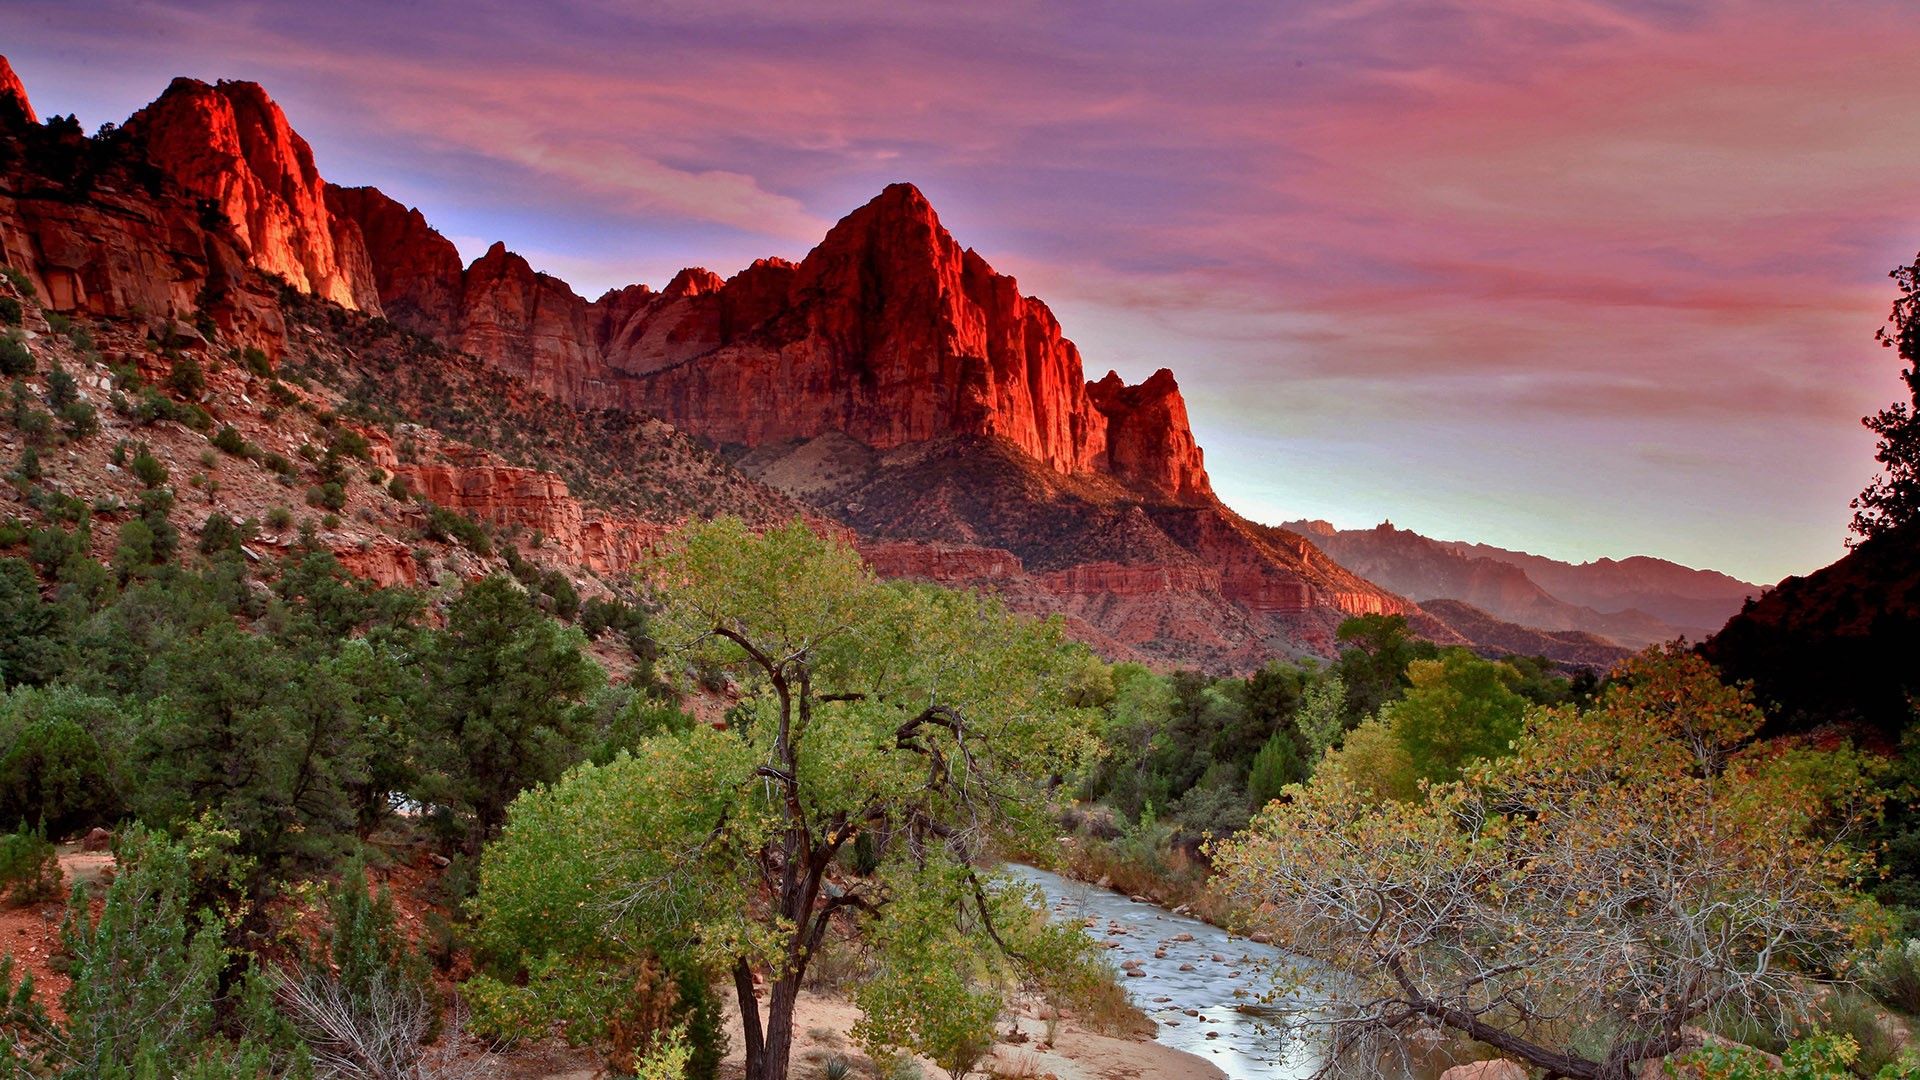 Sunset in Zion National Park, Virgin river with Watchman, Utah, USA. Windows 10 Spotlight Image